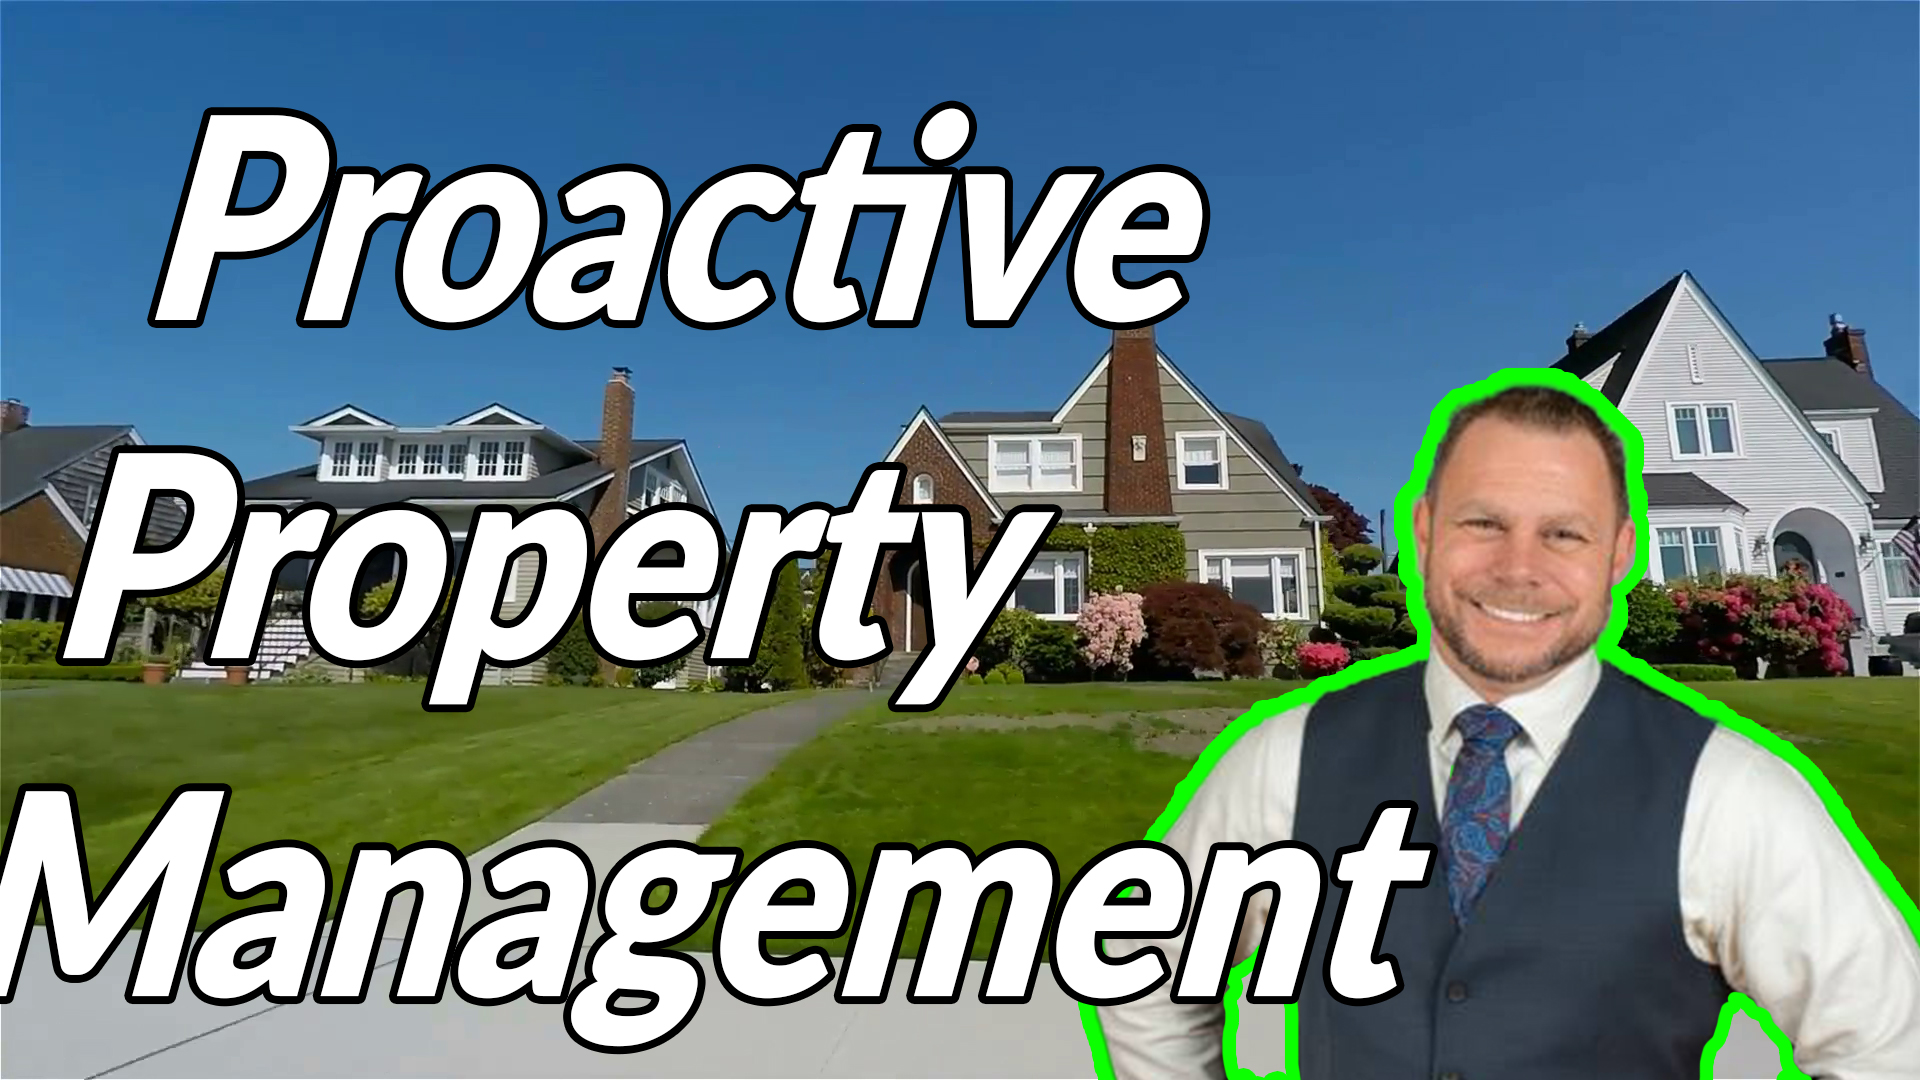 You are currently viewing Proactive Property Management With Al Sartorelli